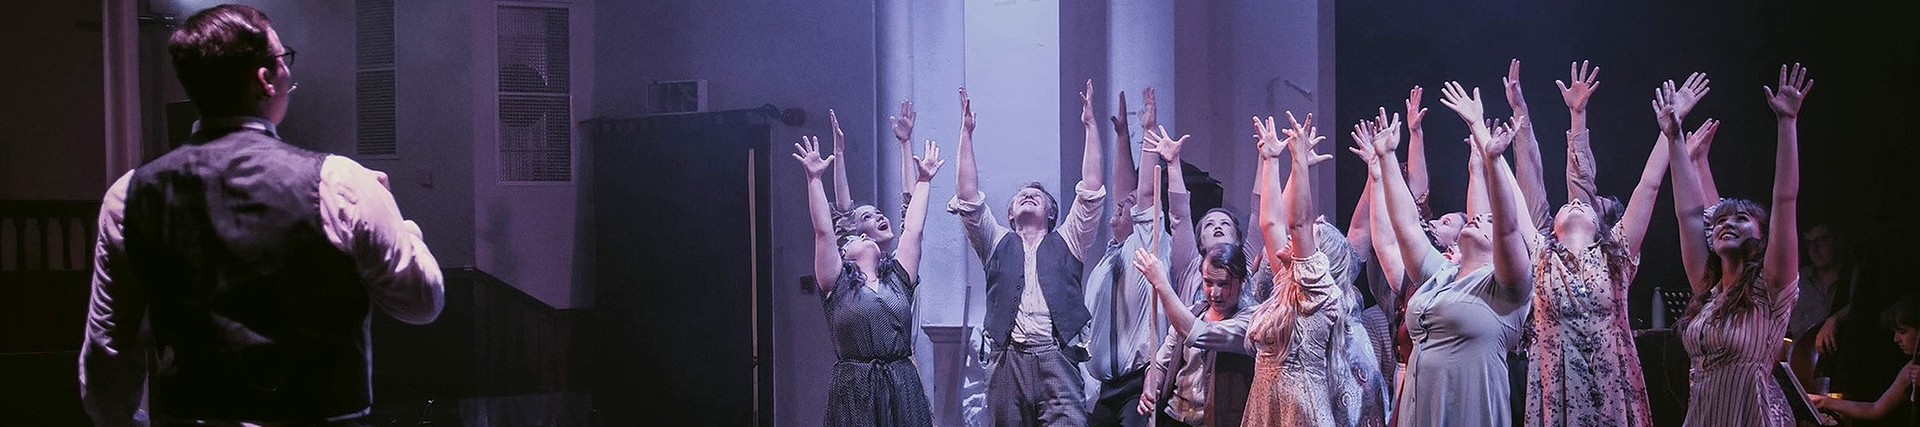 Thirteen cast members dressed in working class early twentieth century costumes raise their hands up as if in joy; a man with parted hair and a black waistcoat watches them from across the stage.